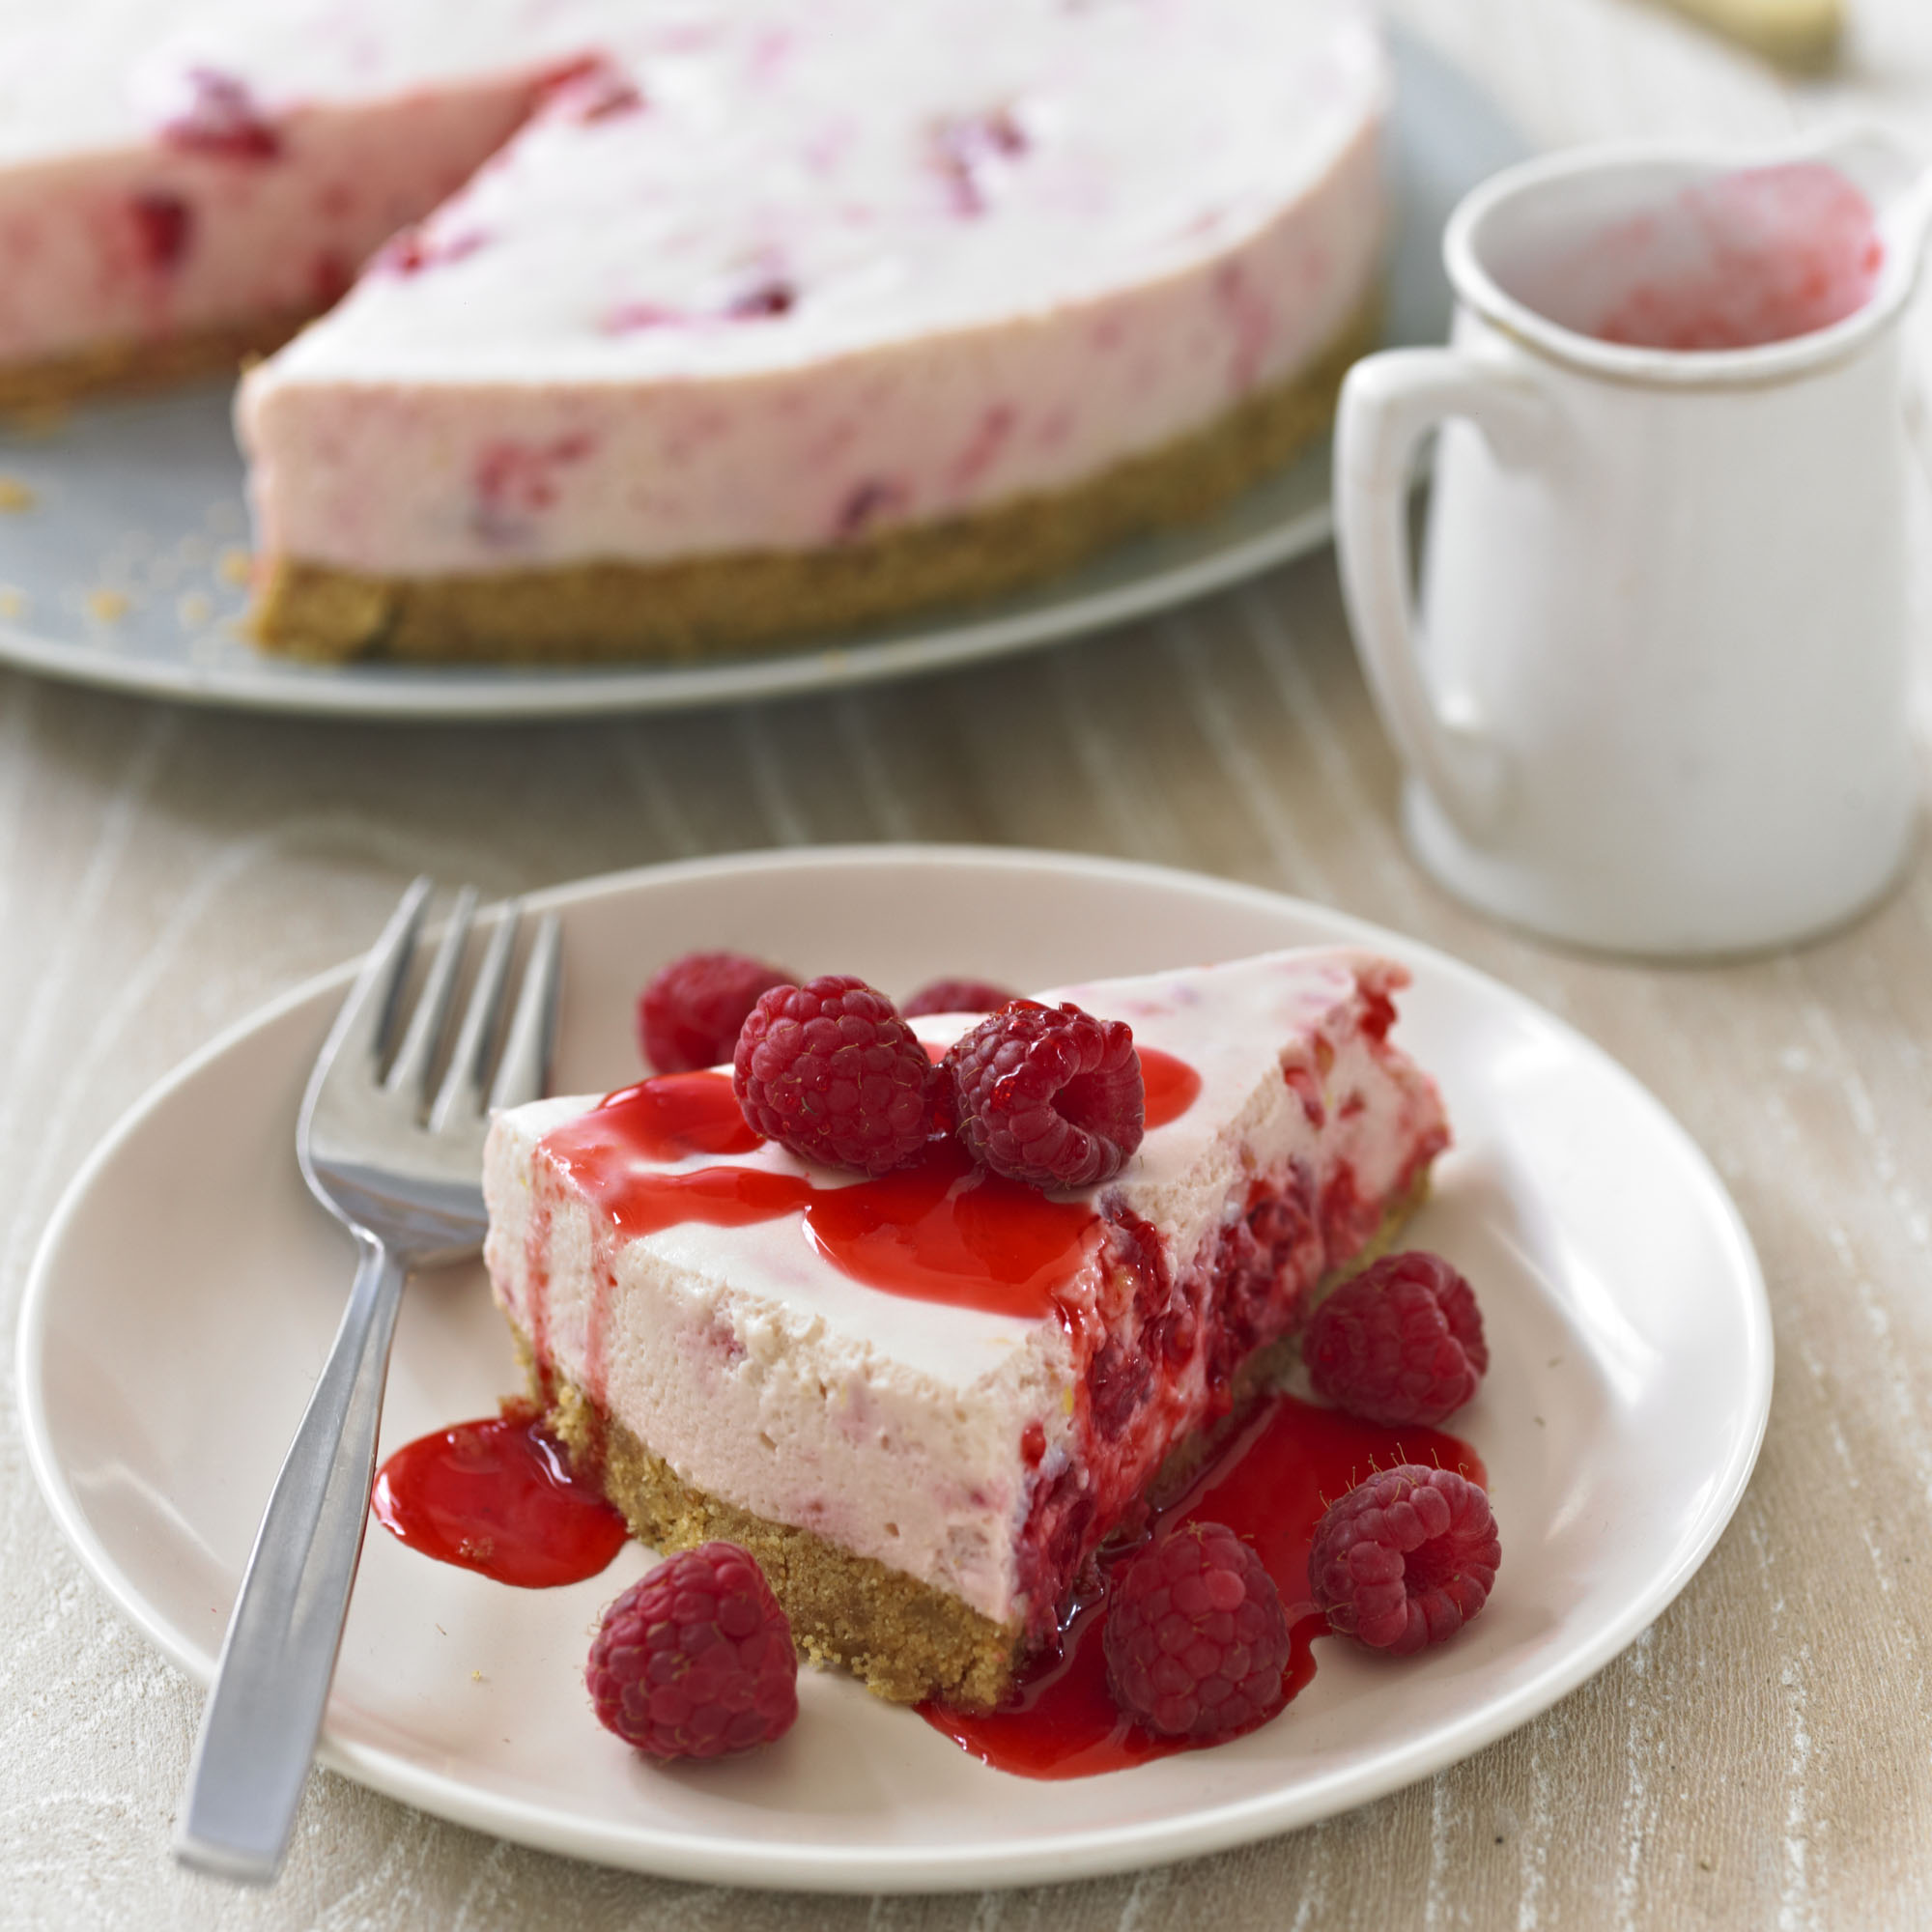 This classic baked cheesecake with fresh raspberries is an indulgent desser...